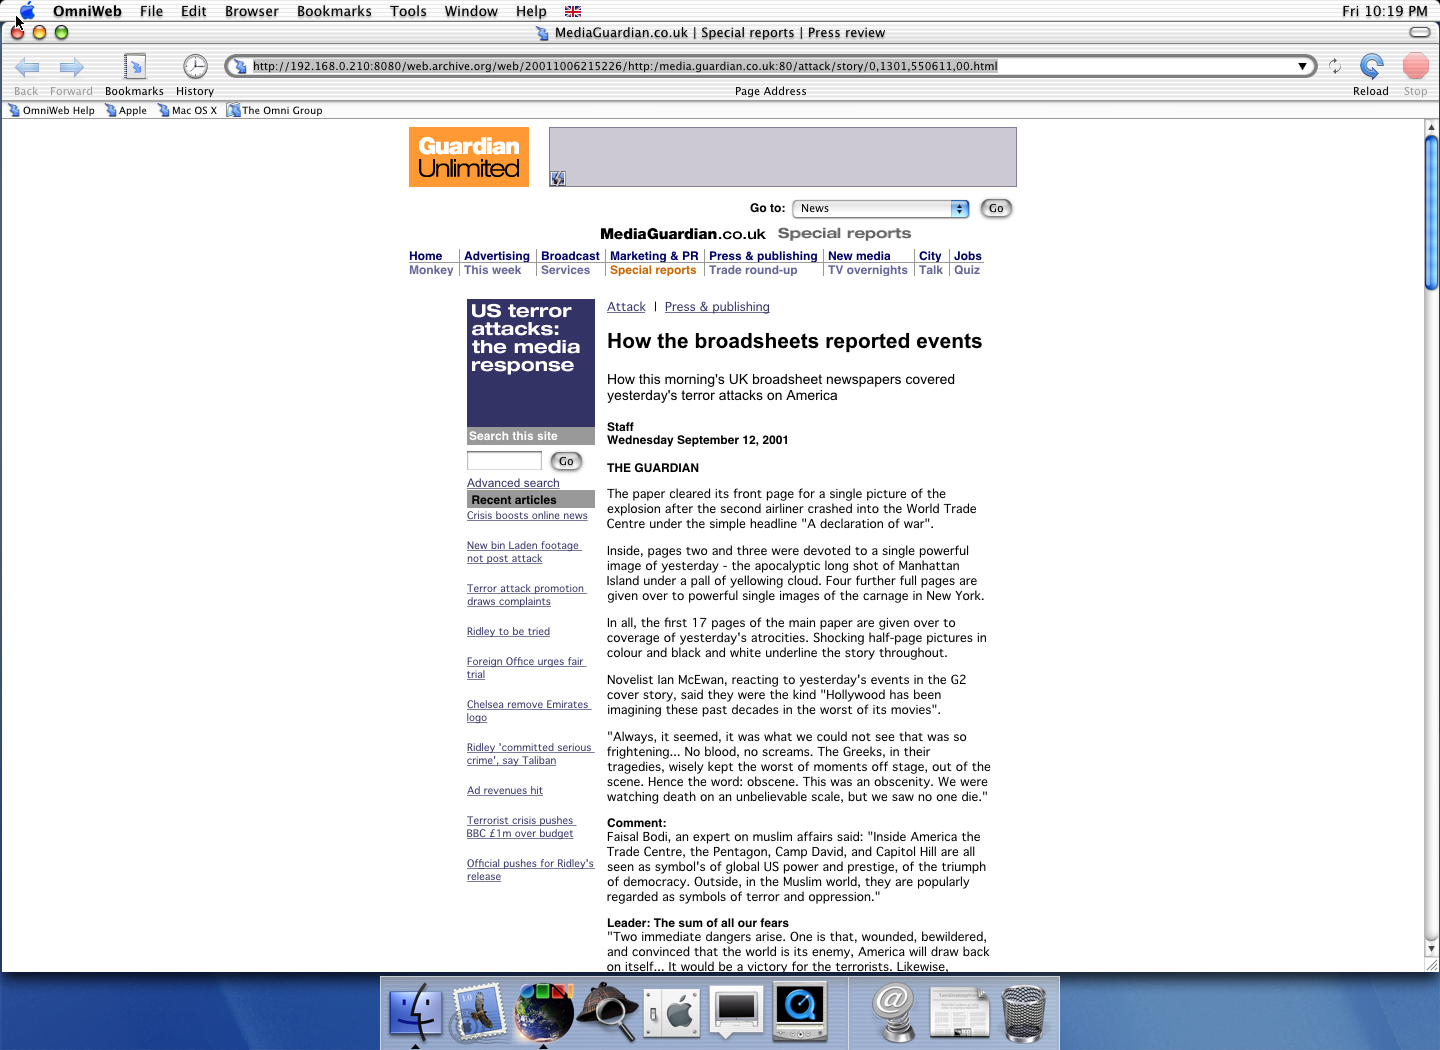 OS X 10.0 PPC with OmniWeb 4.0 displaying a page from The Guardian archived at October 06, 2001 at 21:52:26